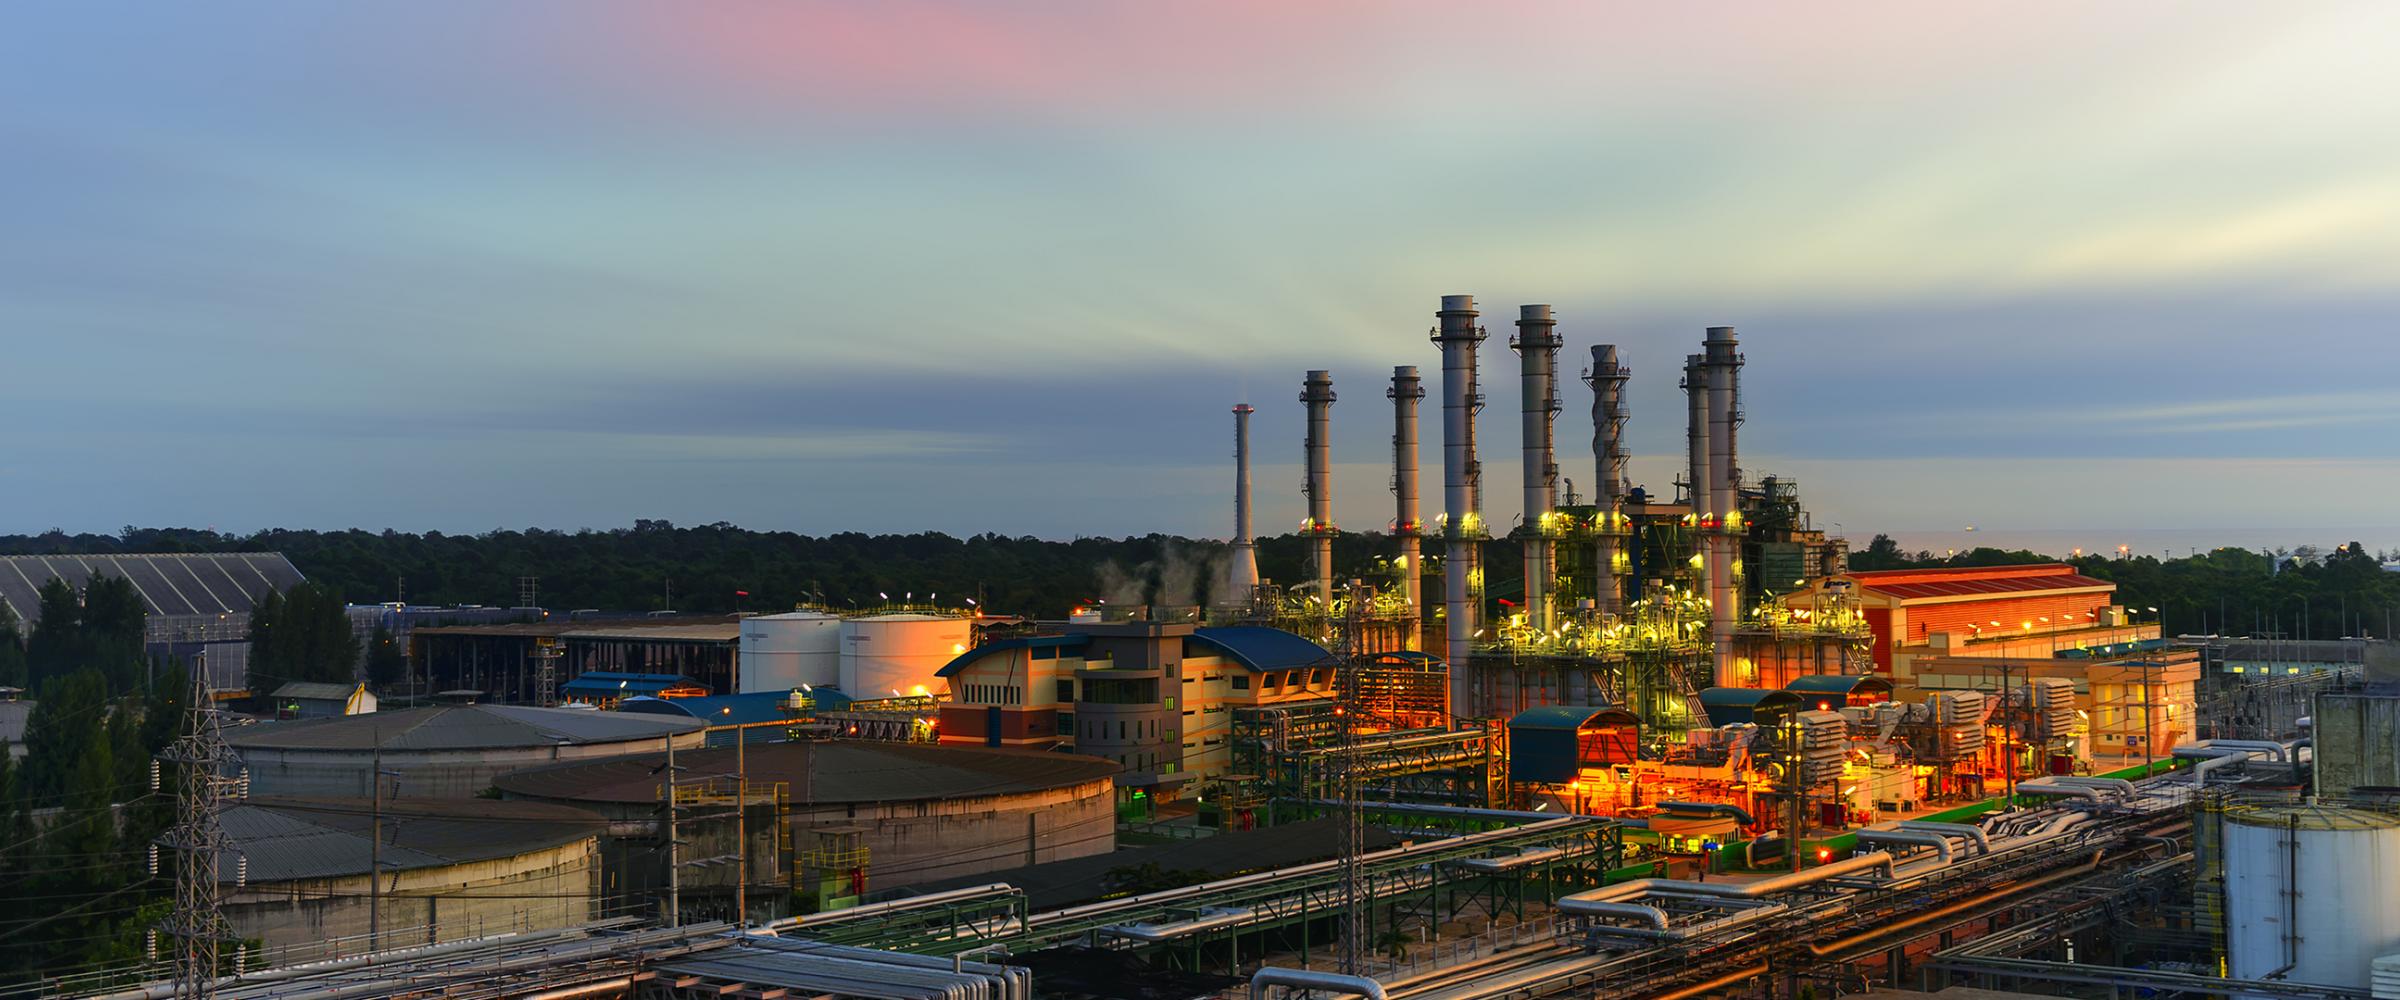 Exterior view of a glowing energy industrial factory at sunset.